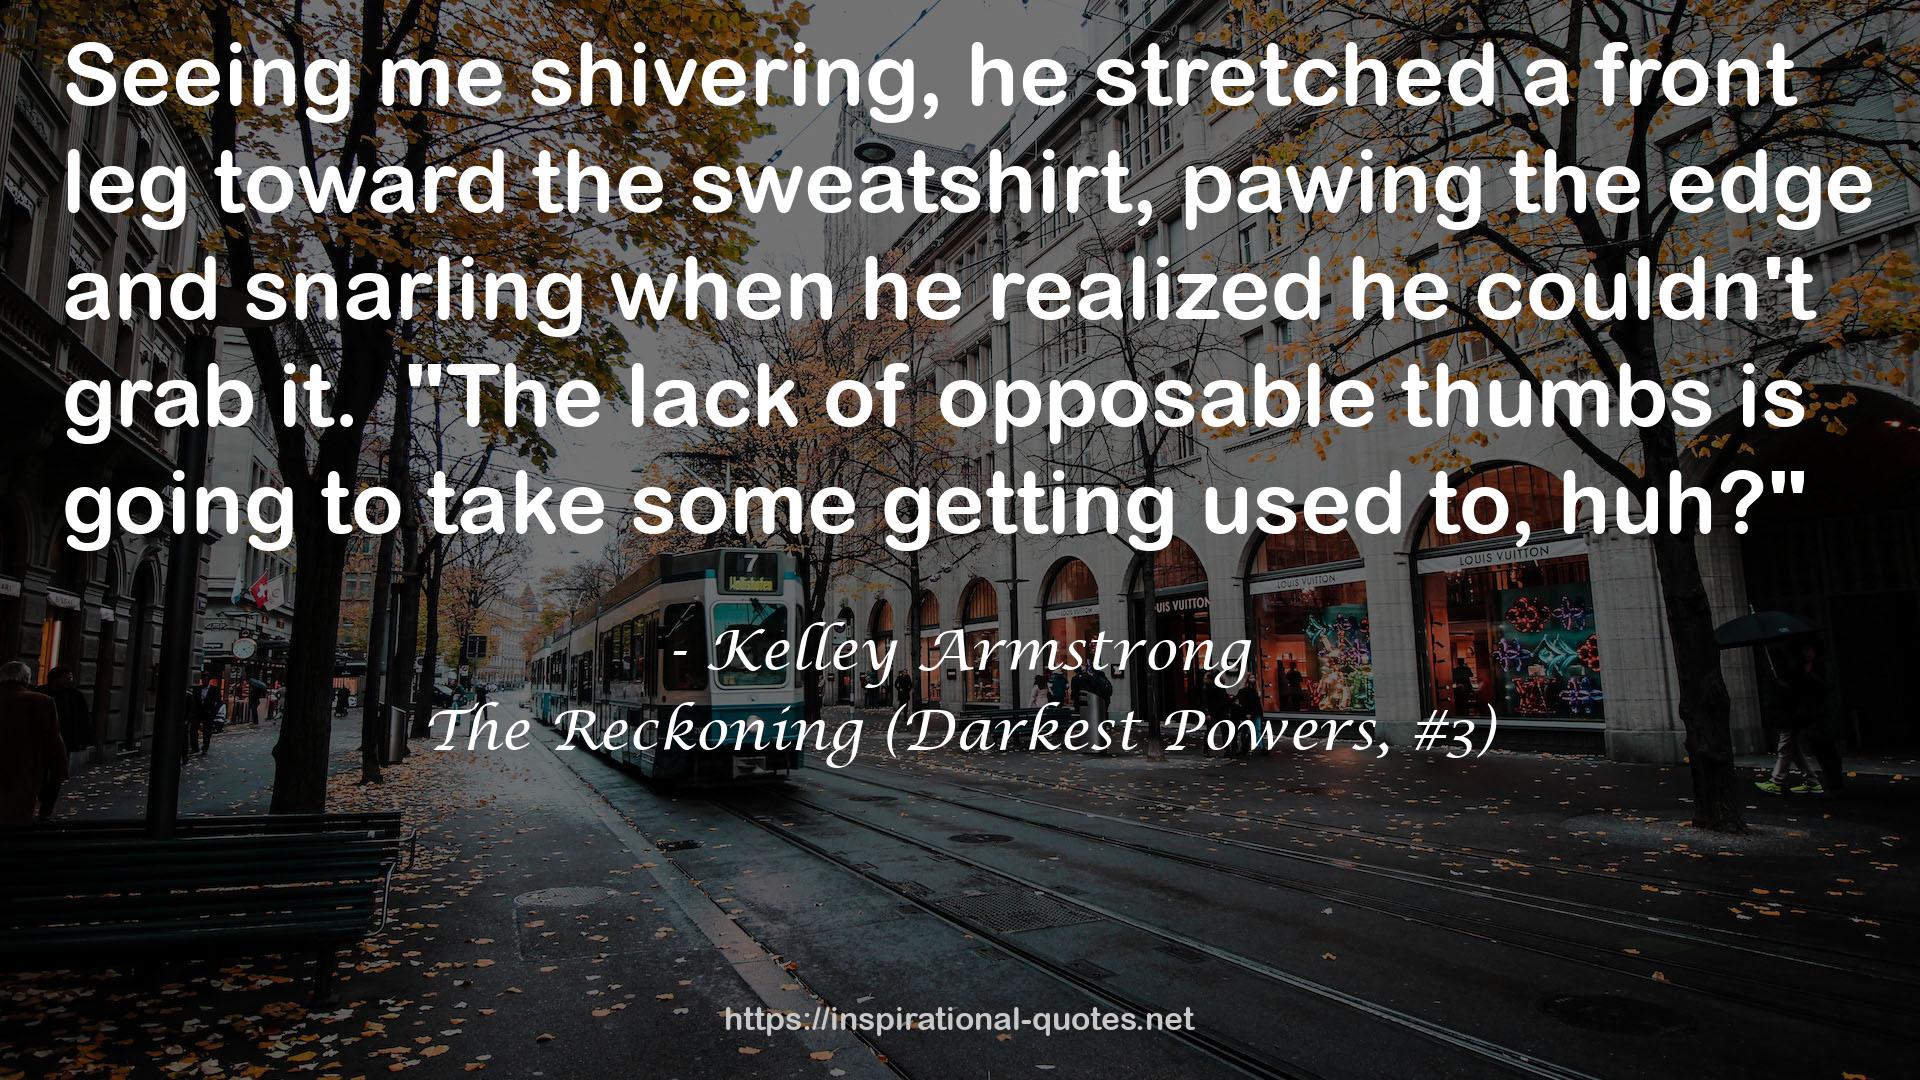 The Reckoning (Darkest Powers, #3) QUOTES